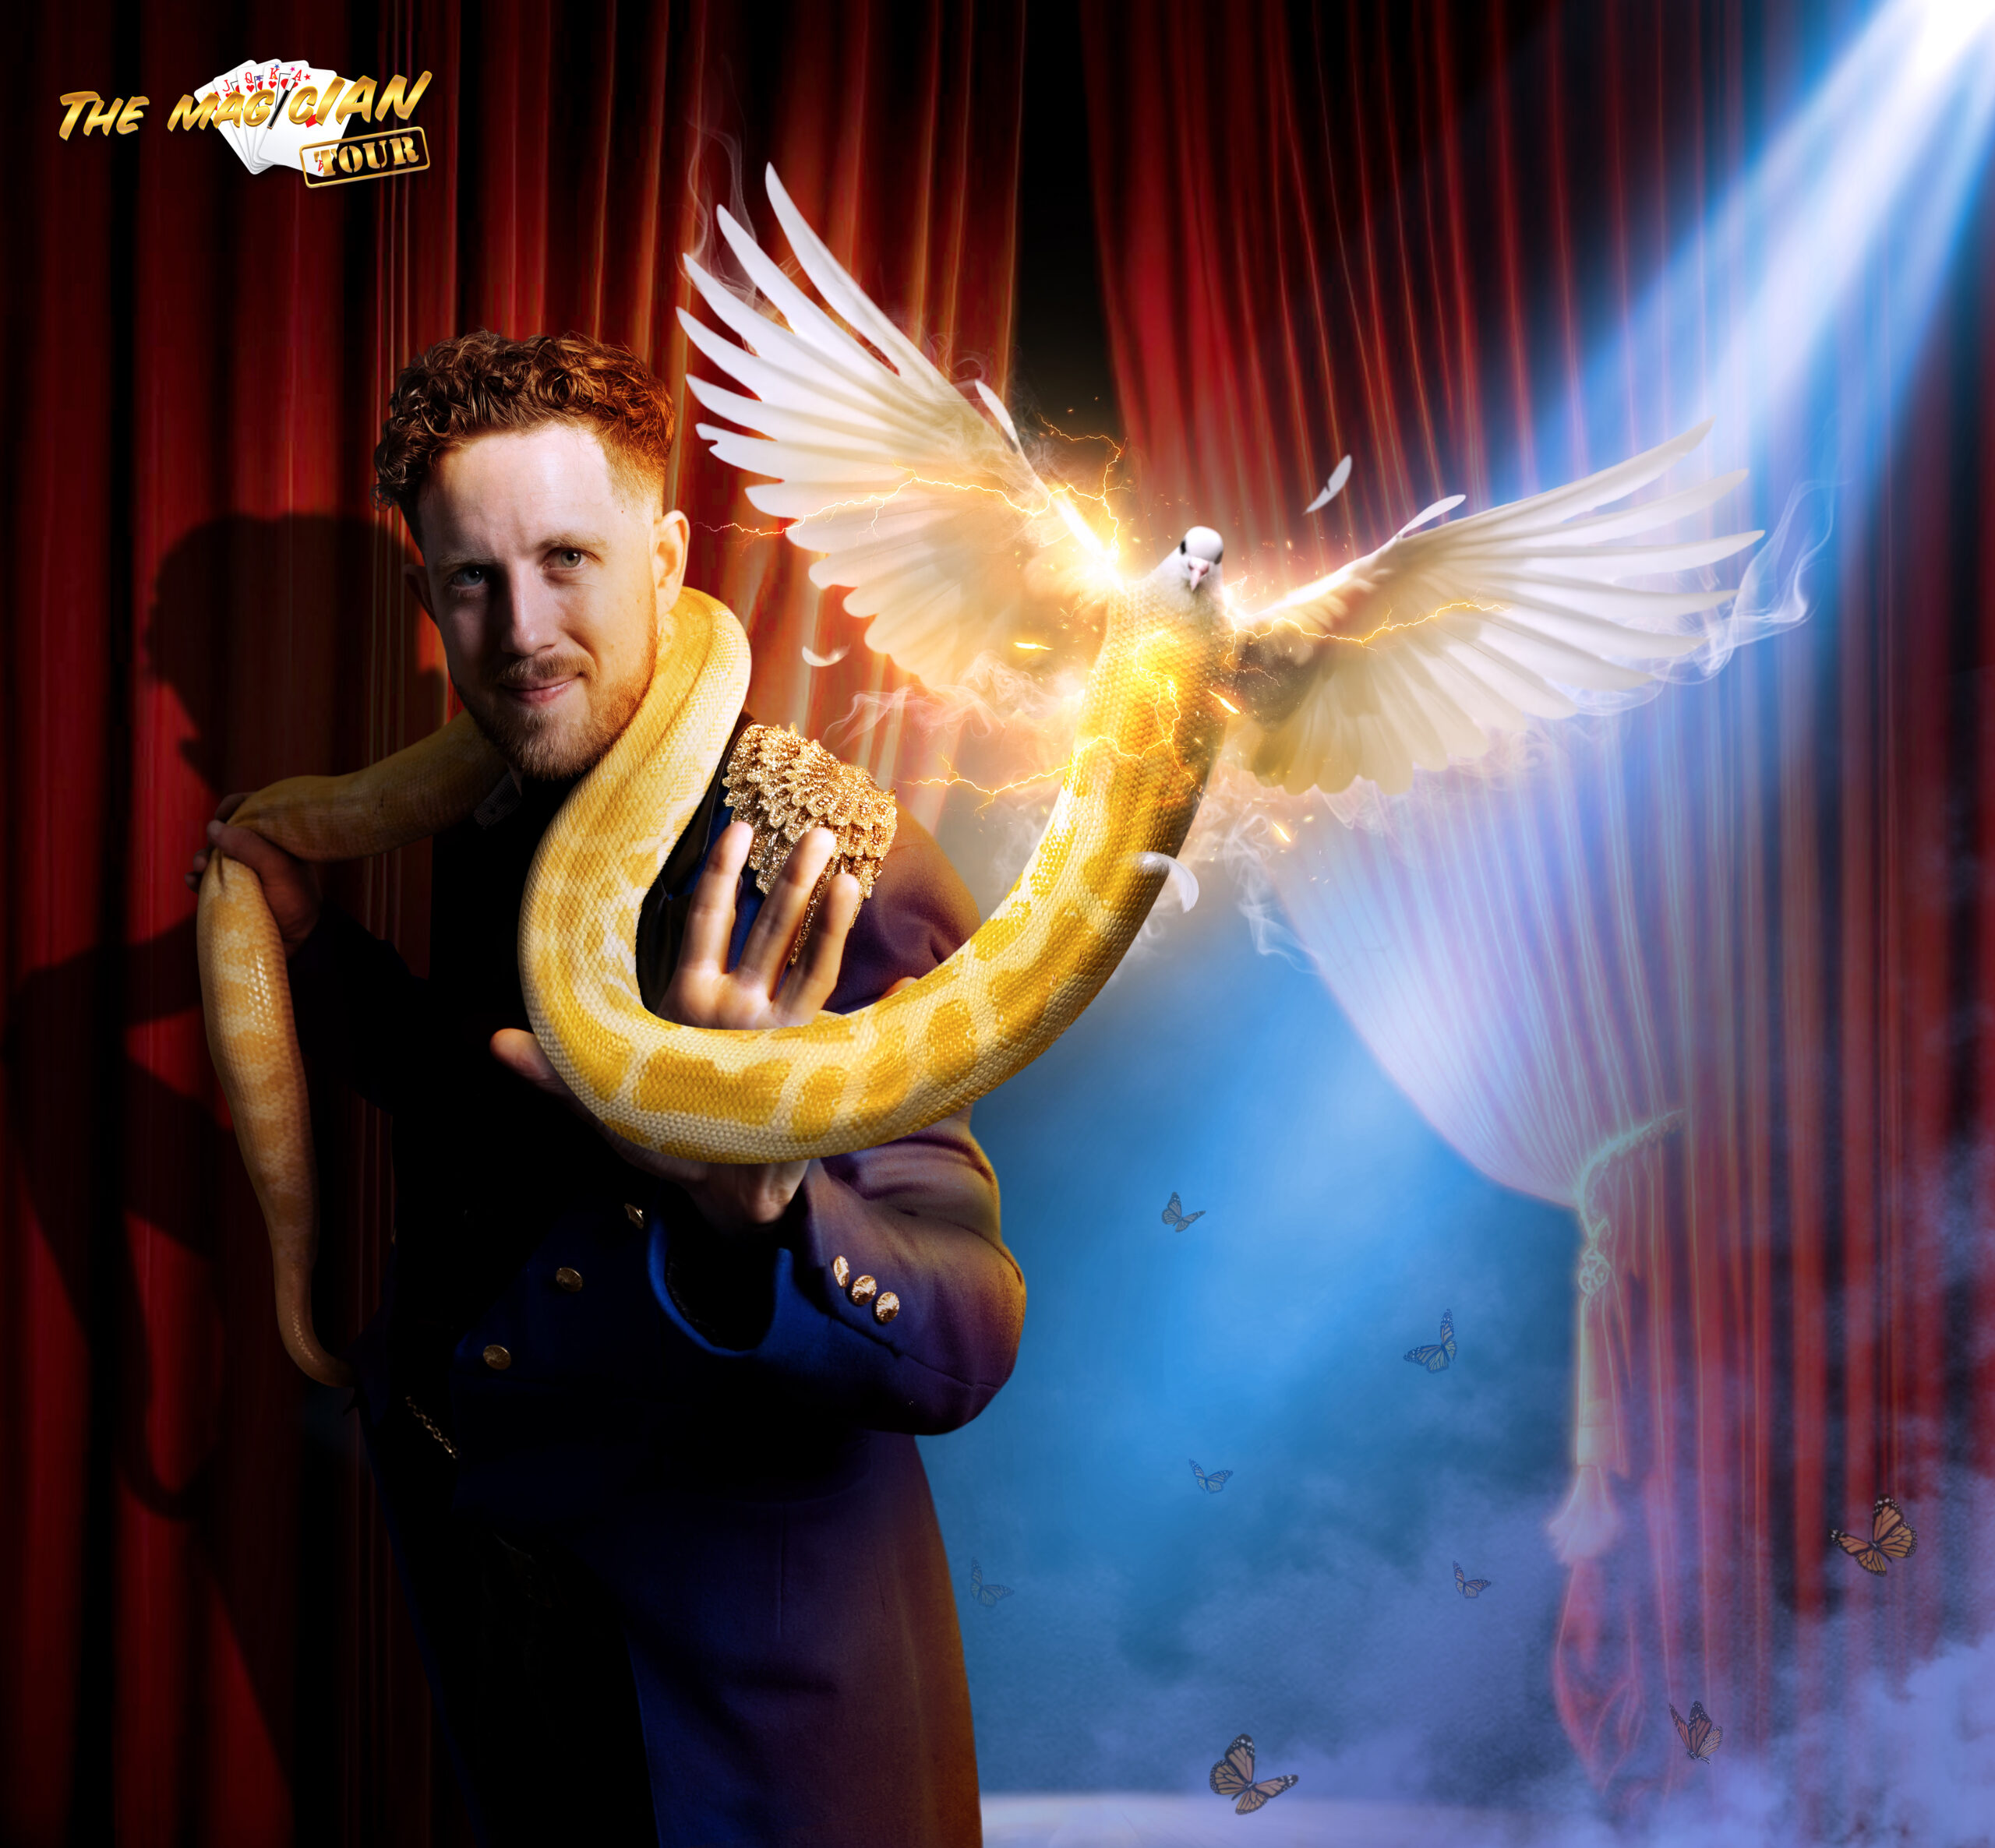 Comedy magician - The show features a motivational message along with real doves magically morphing into a real snake with visual effects.